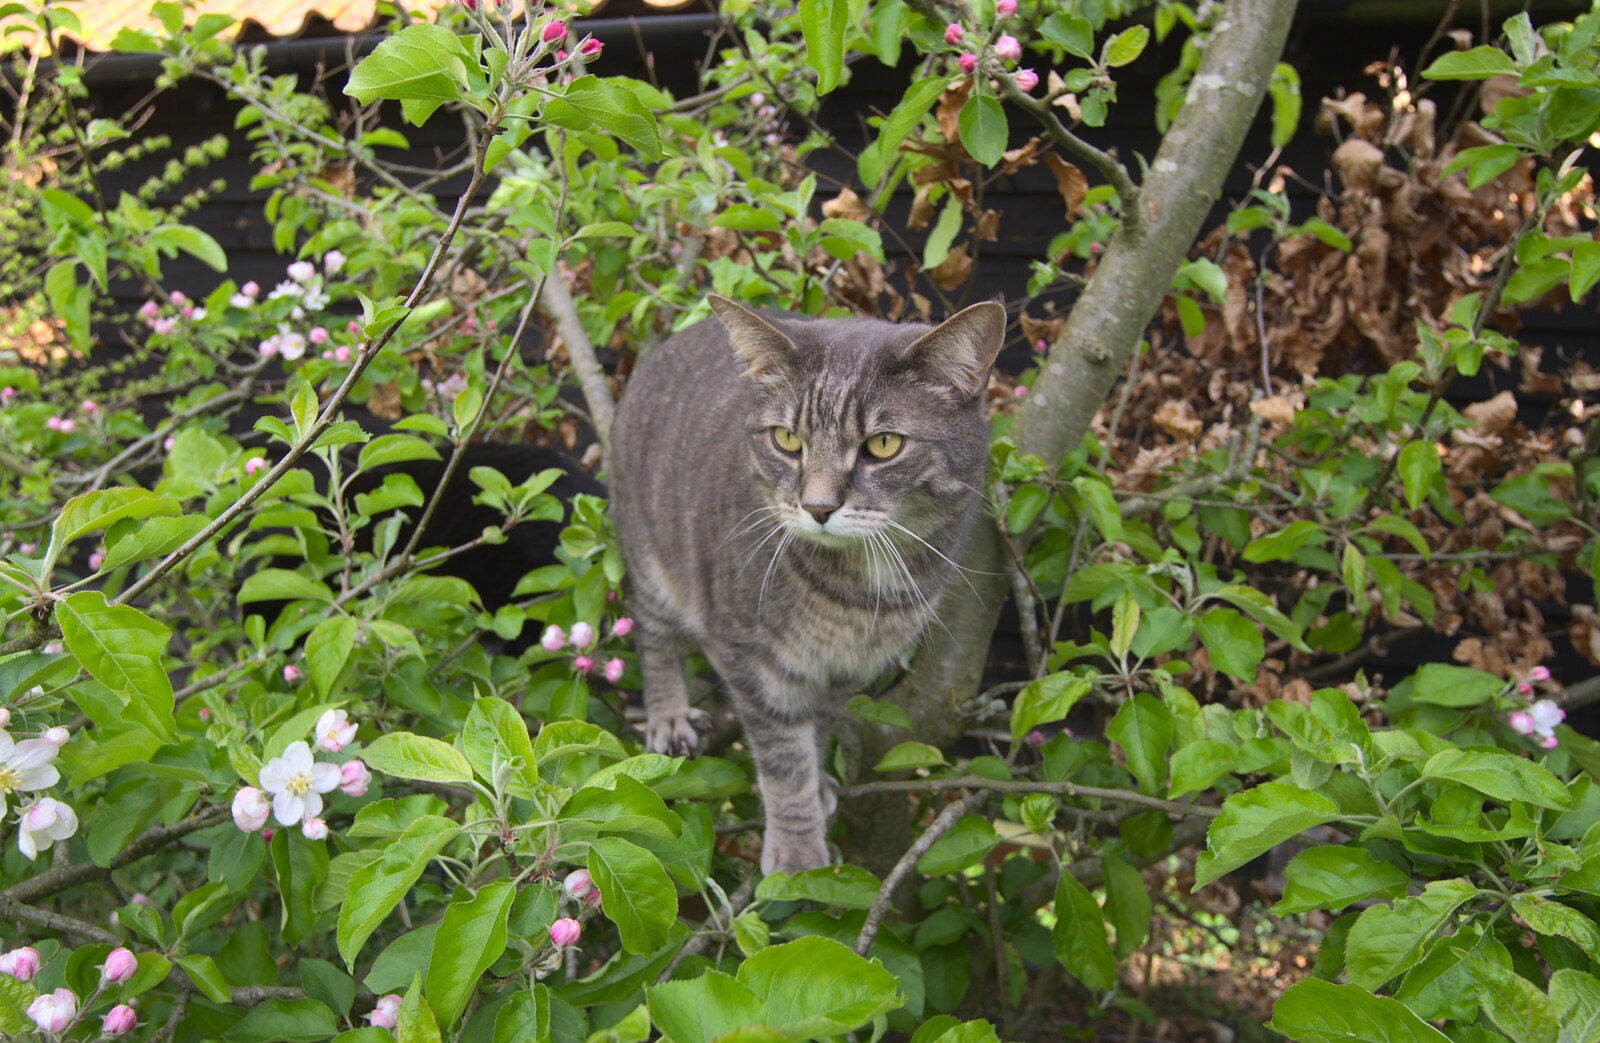 Back home, Boris - Stripey Cat - is up a tree from A Trip to Audley End House, Saffron Walden, Essex - 16th April 2014